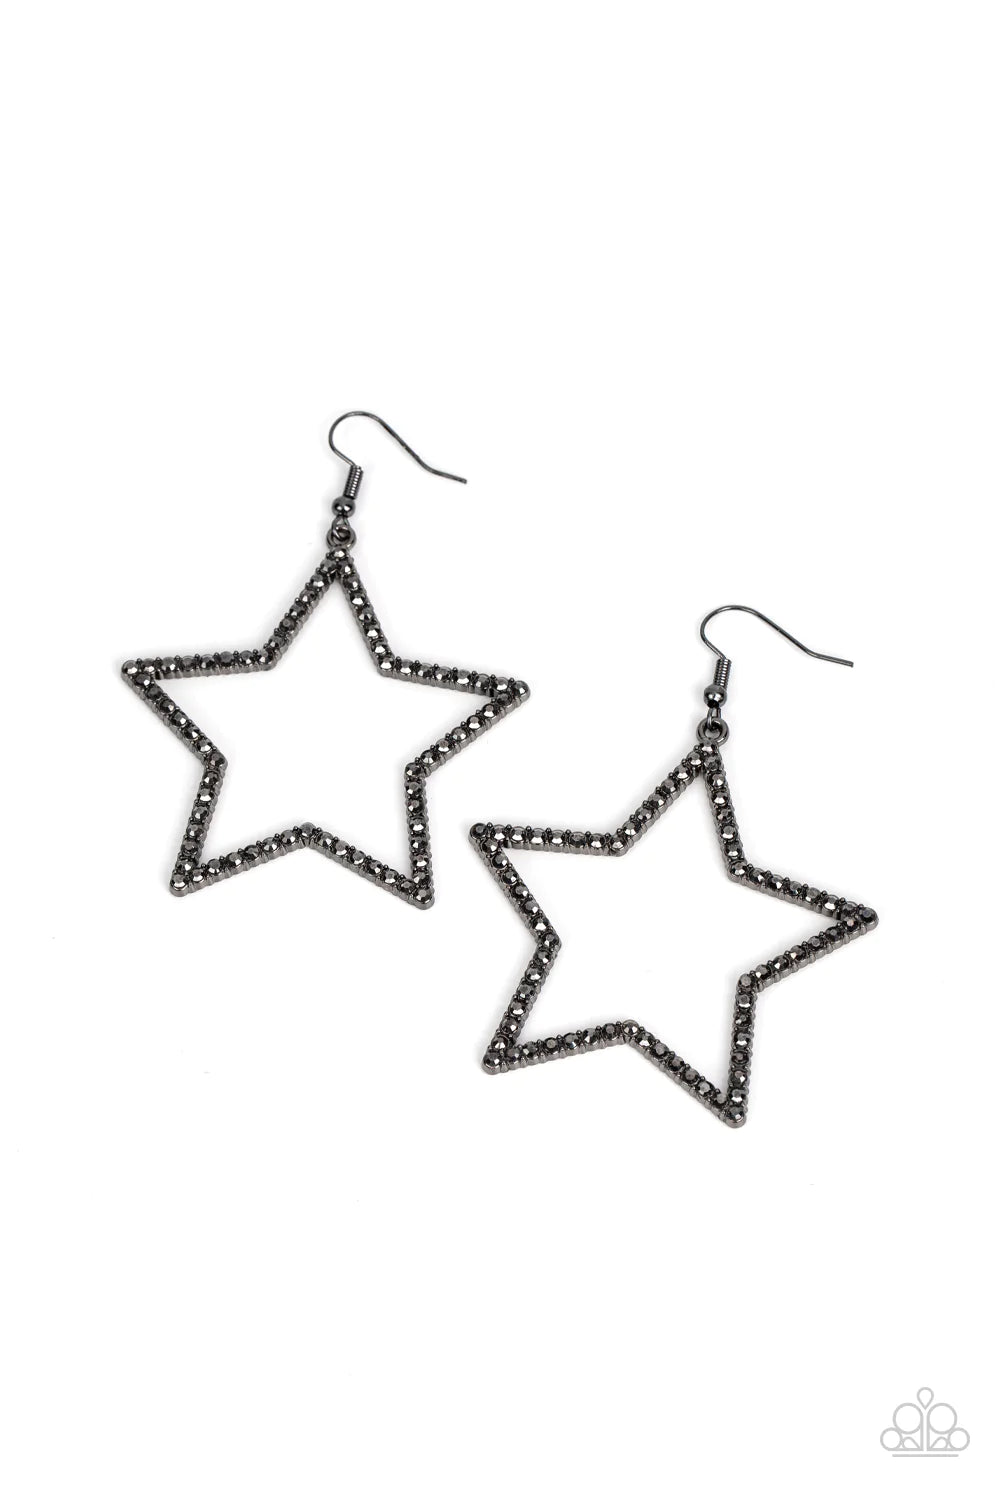 Paparazzi Accessories Supernova Sparkle - Black Smoky hematite rhinestones adorn the front of an oversized gunmetal star silhouette, sparking into a stellar centerpiece. Earring attaches to a standard fishhook fitting. Sold as one pair of earrings. Jewelr